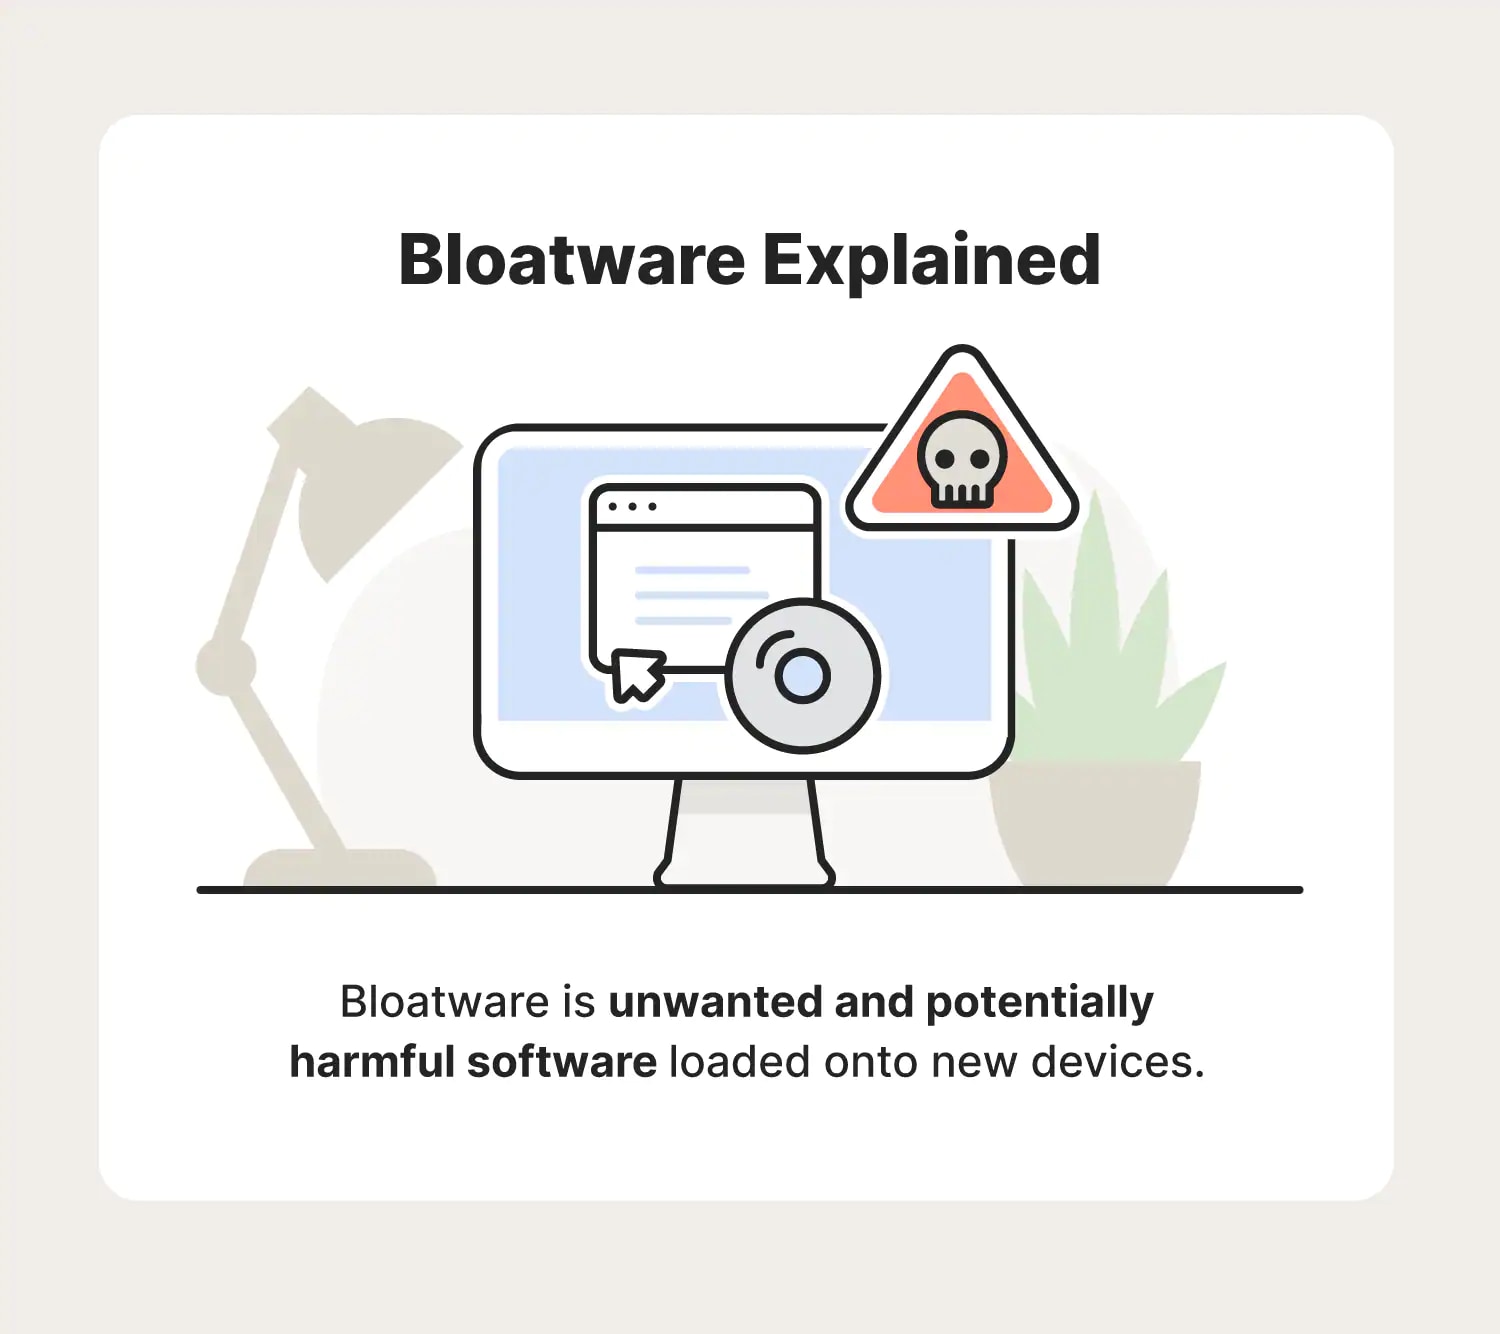 A graphic explains bloatware, an unwanted and potentially dangerous form of software.